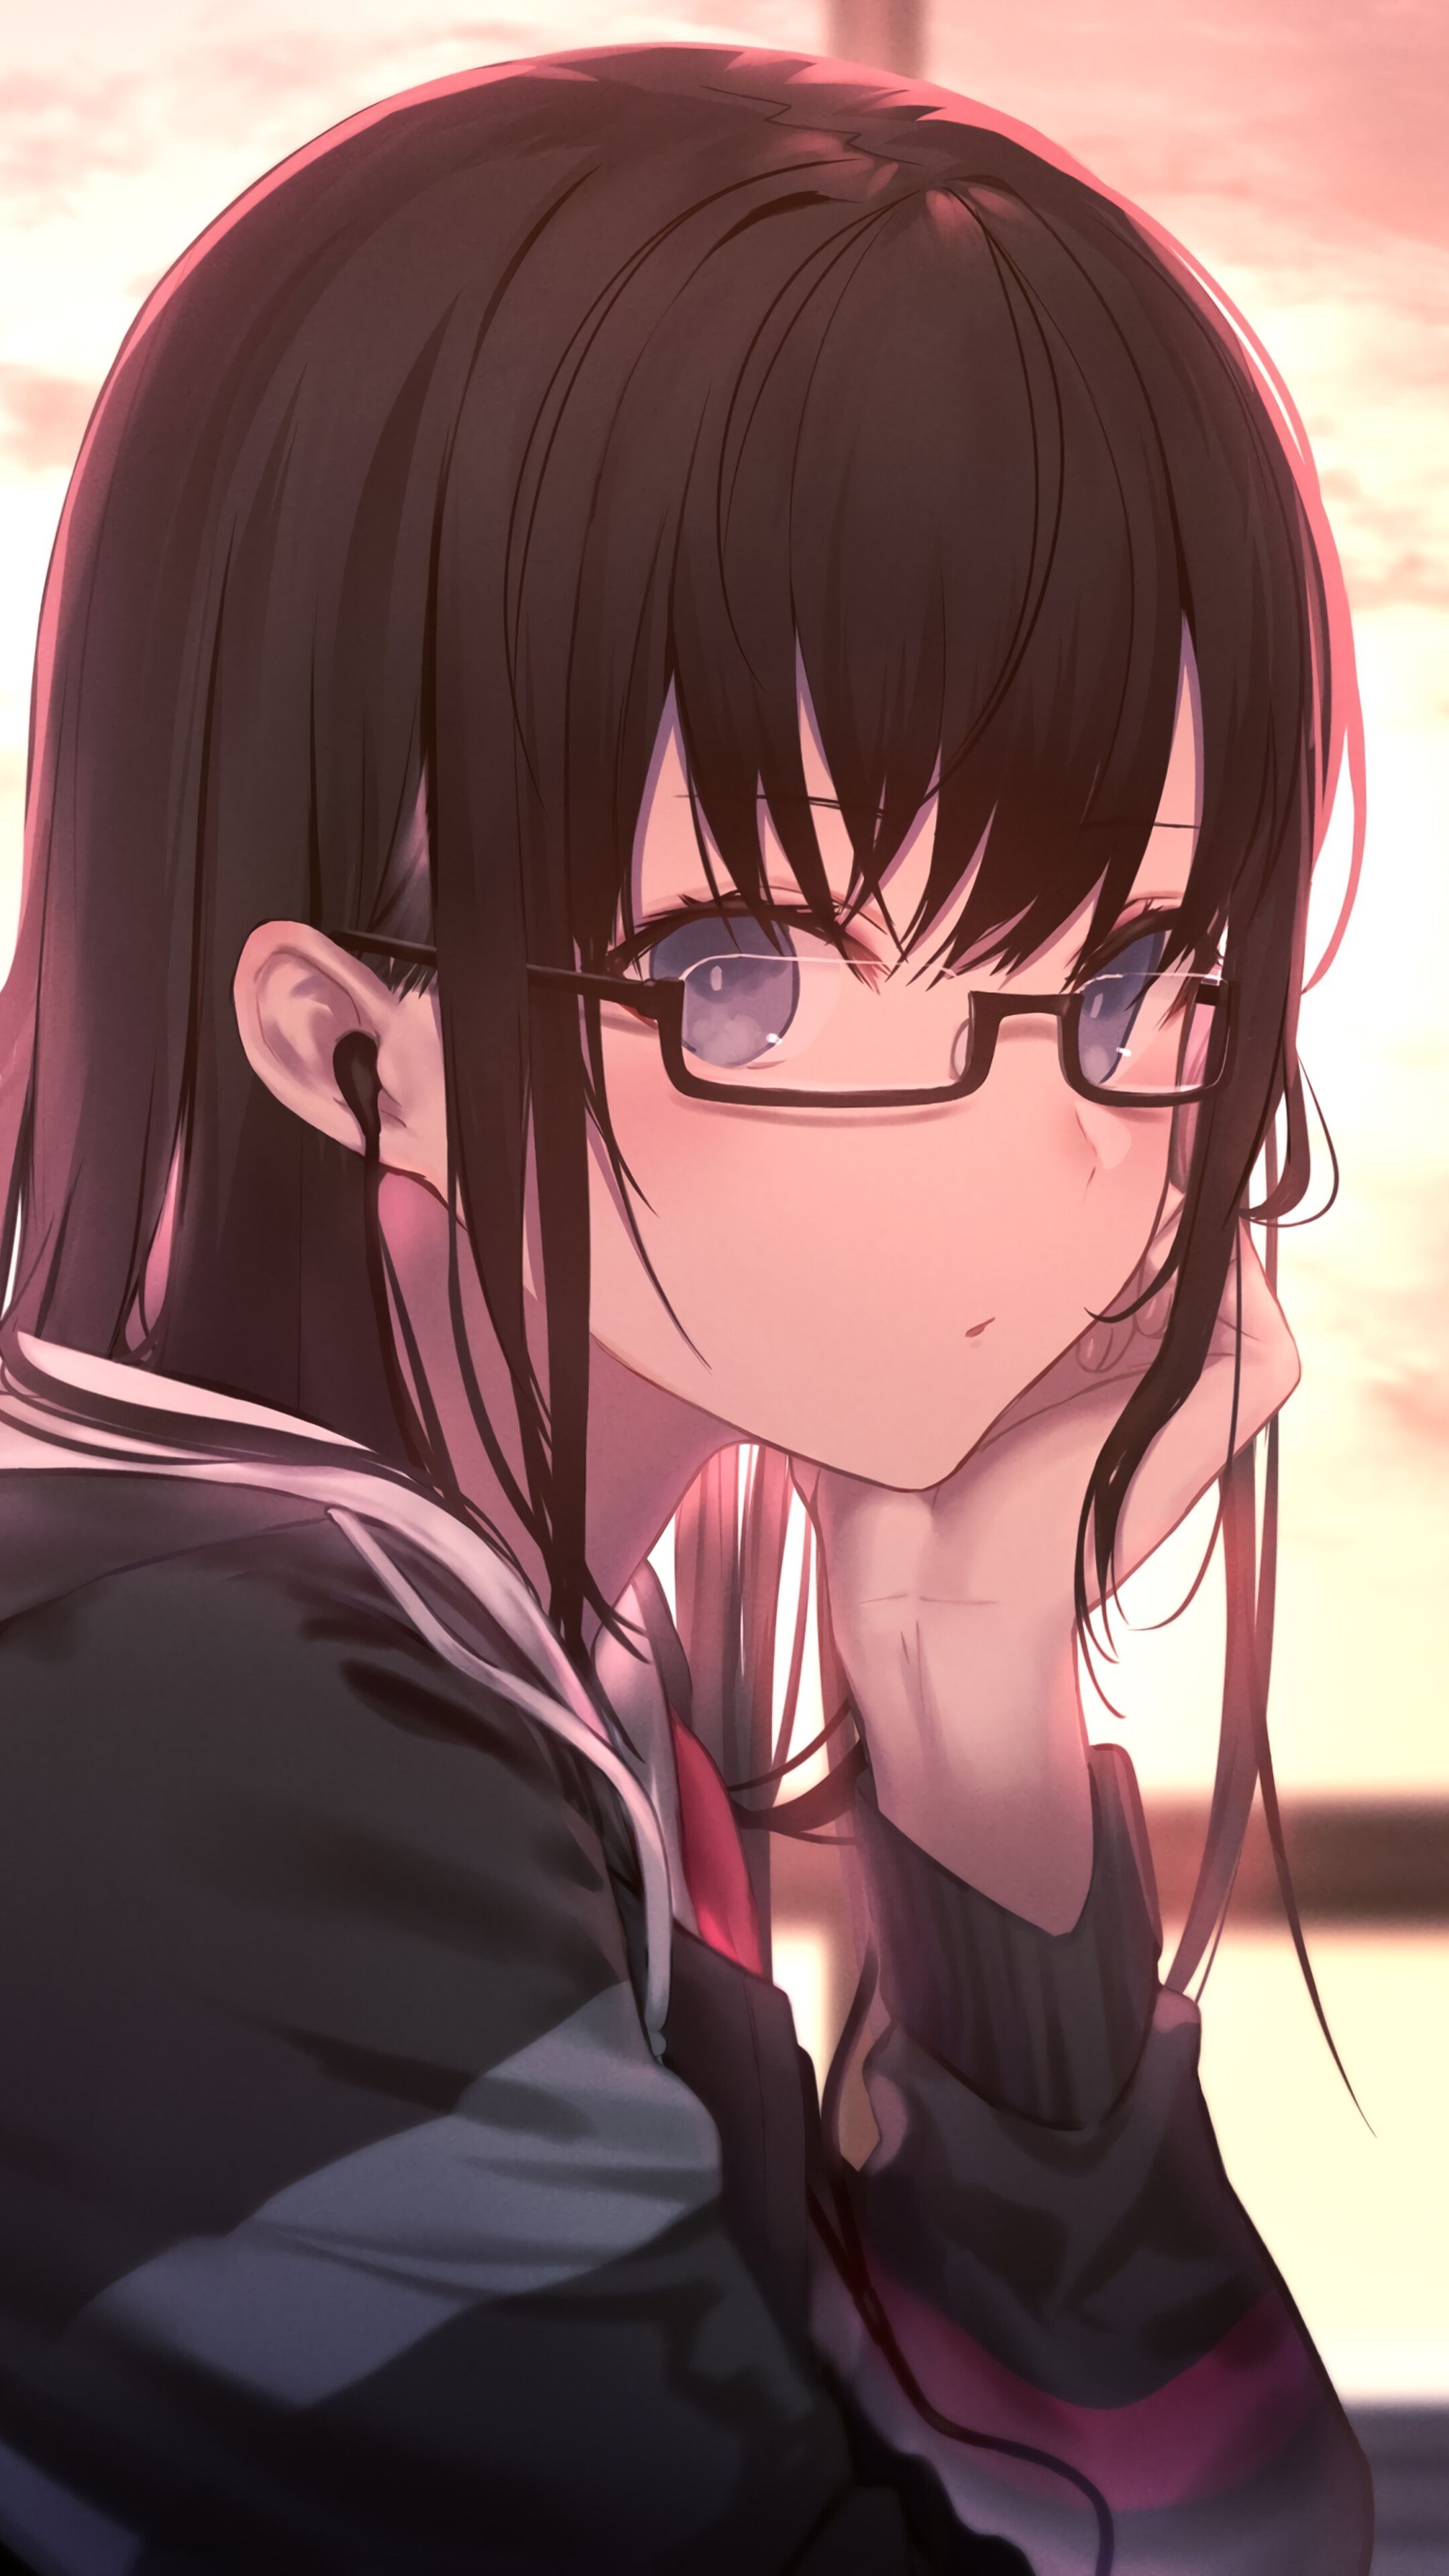 Wife  Anime Girl Wearing Glasses Transparent PNG  600x800  Free Download  on NicePNG